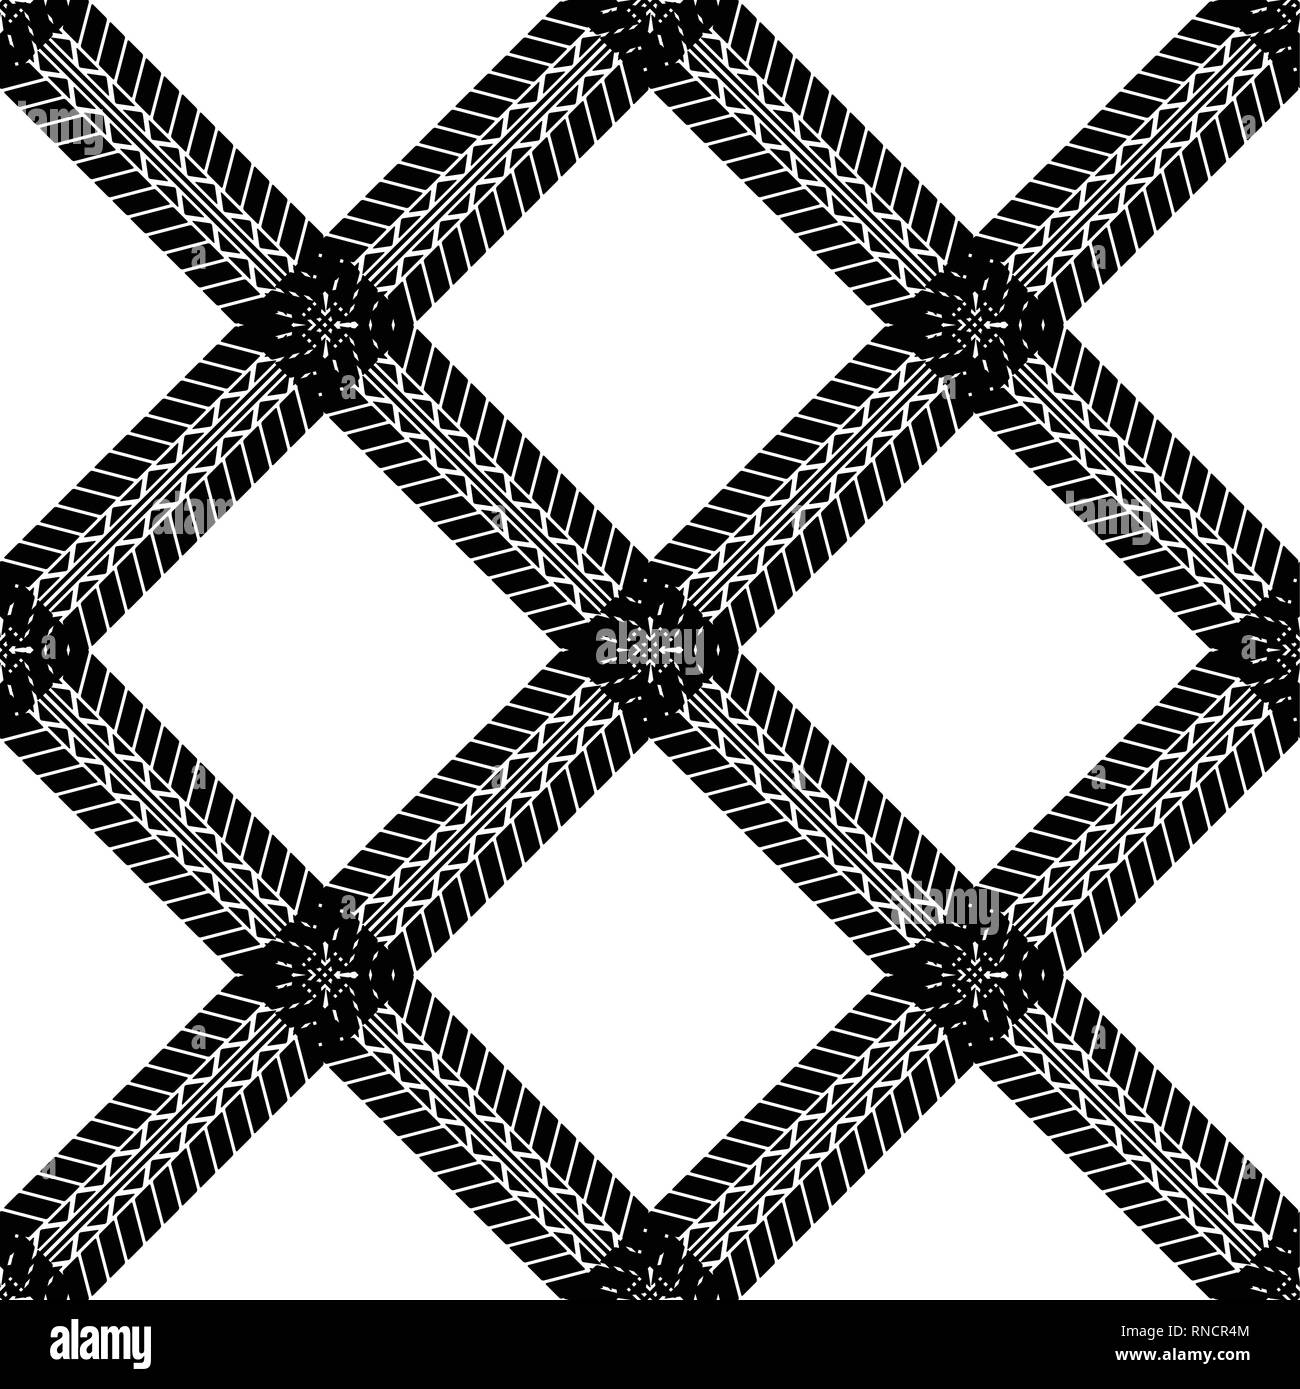 Diagonal seamless tire track background with black pattern Stock Vector